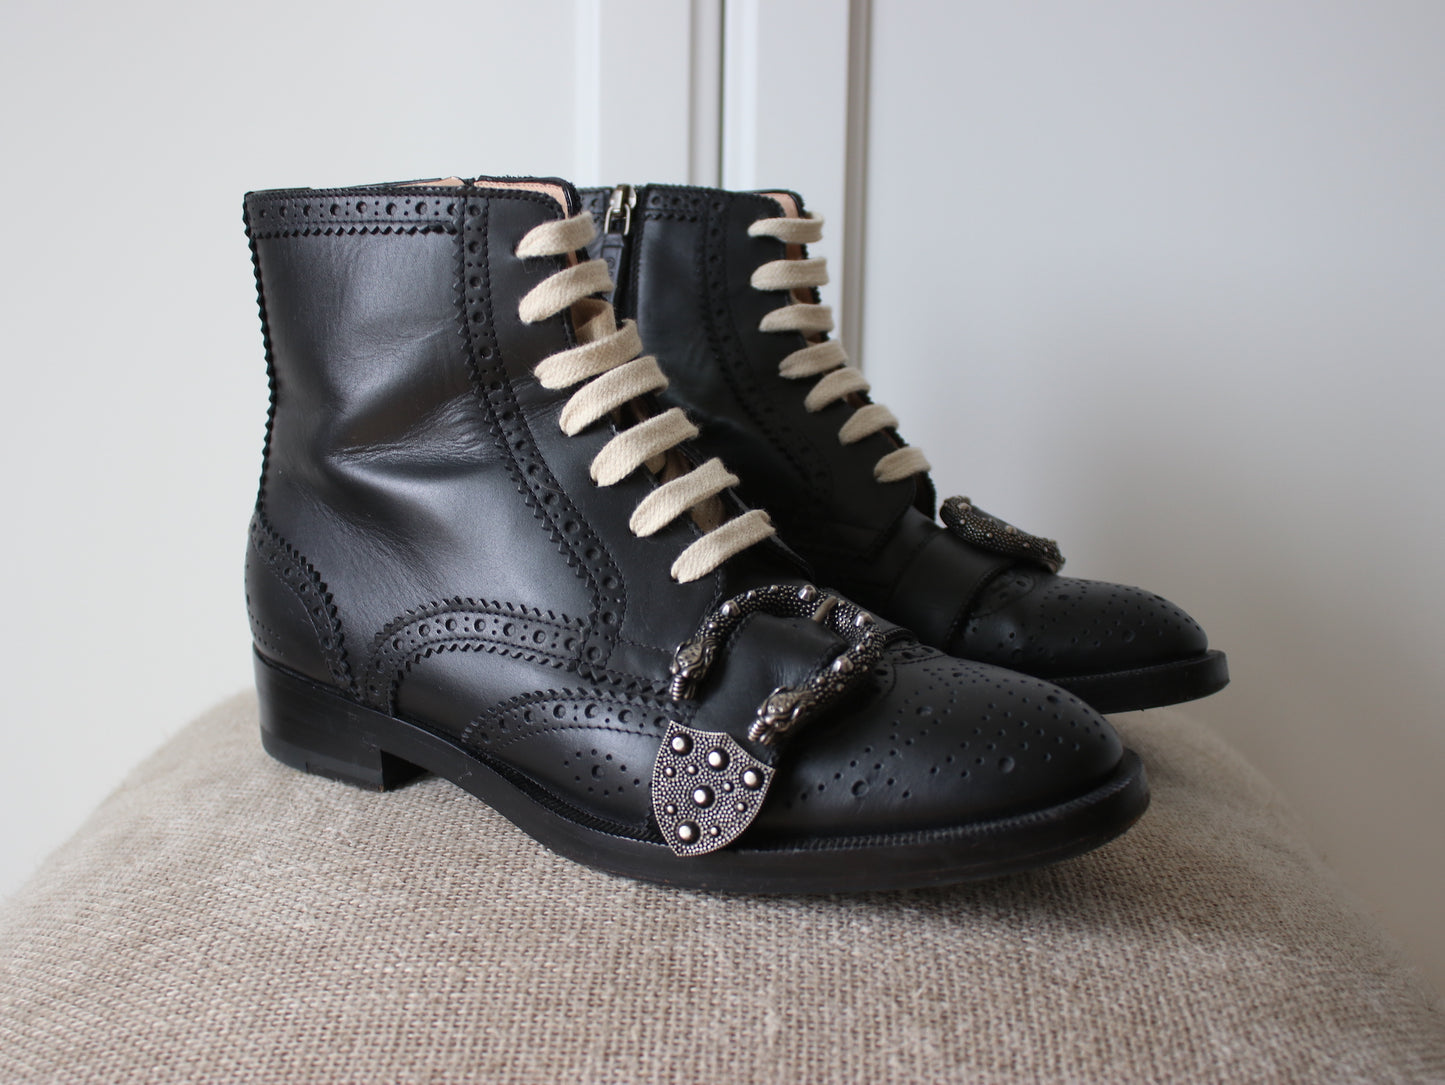 Gucci Lace-up Boots, 38